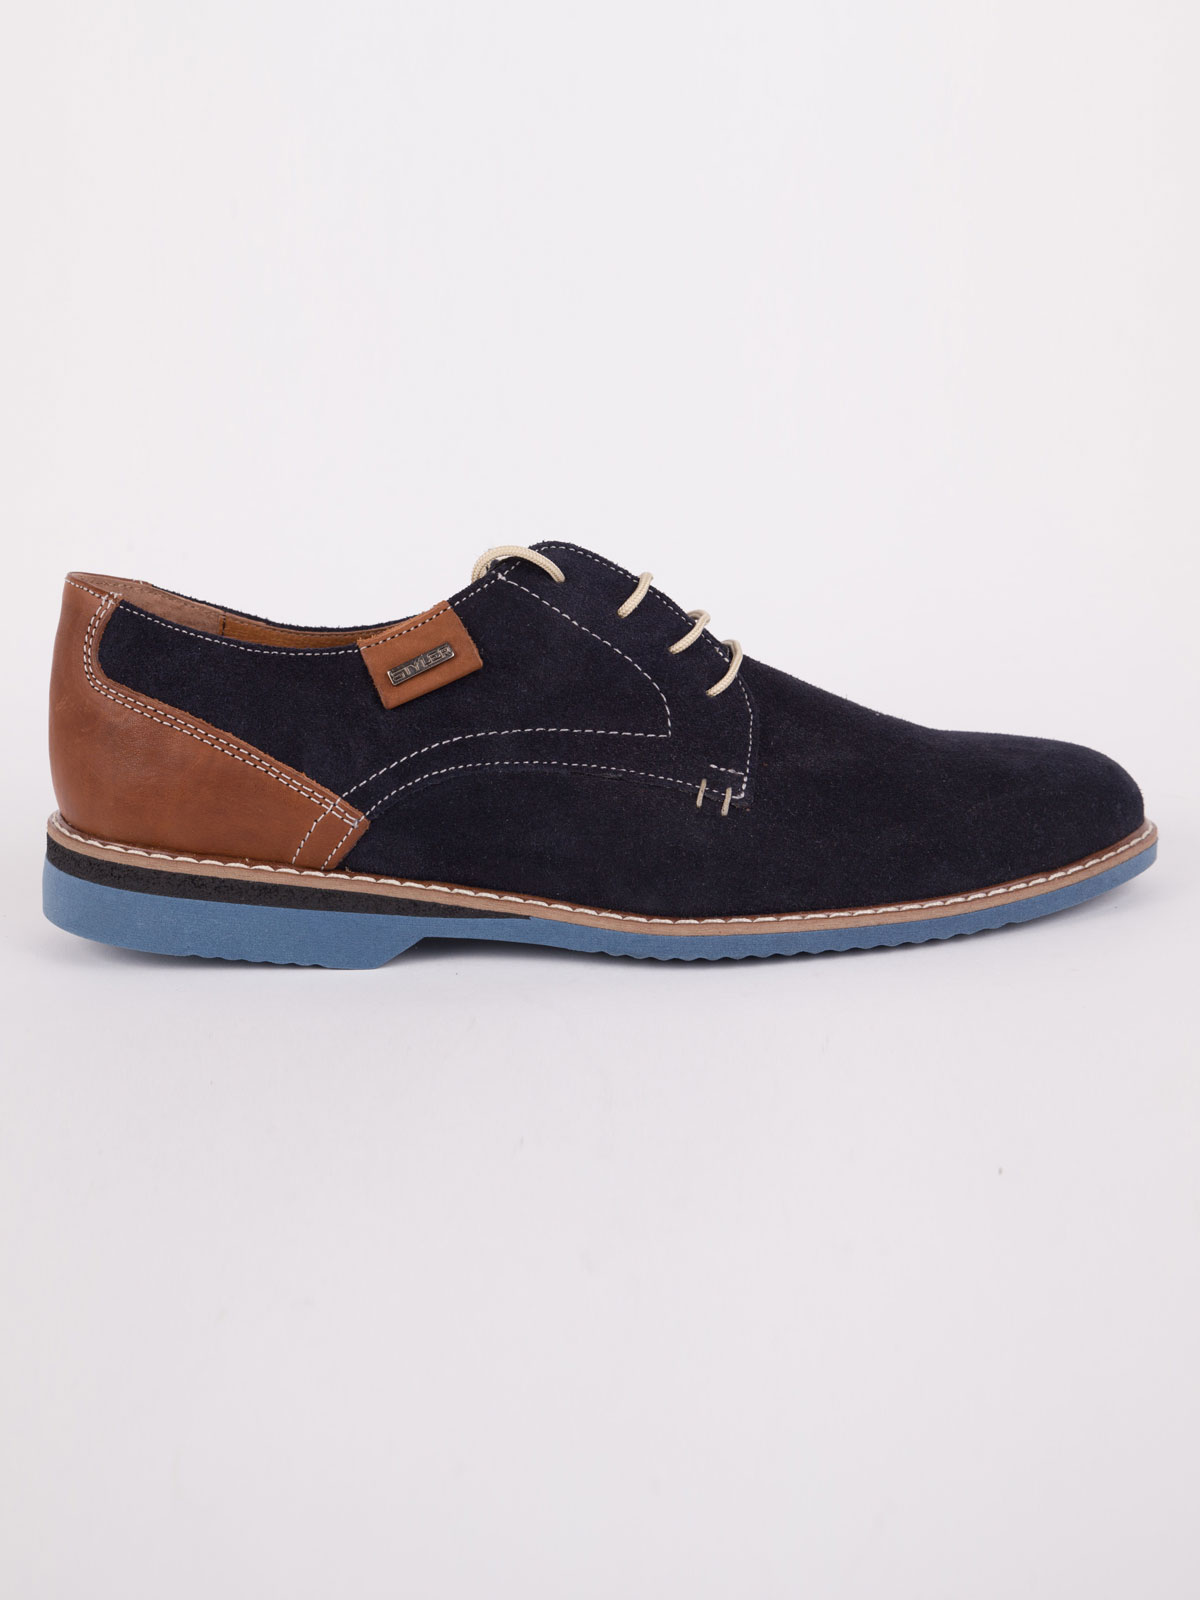 Mens suede and leather shoes - 81078 - € 83.24 img4